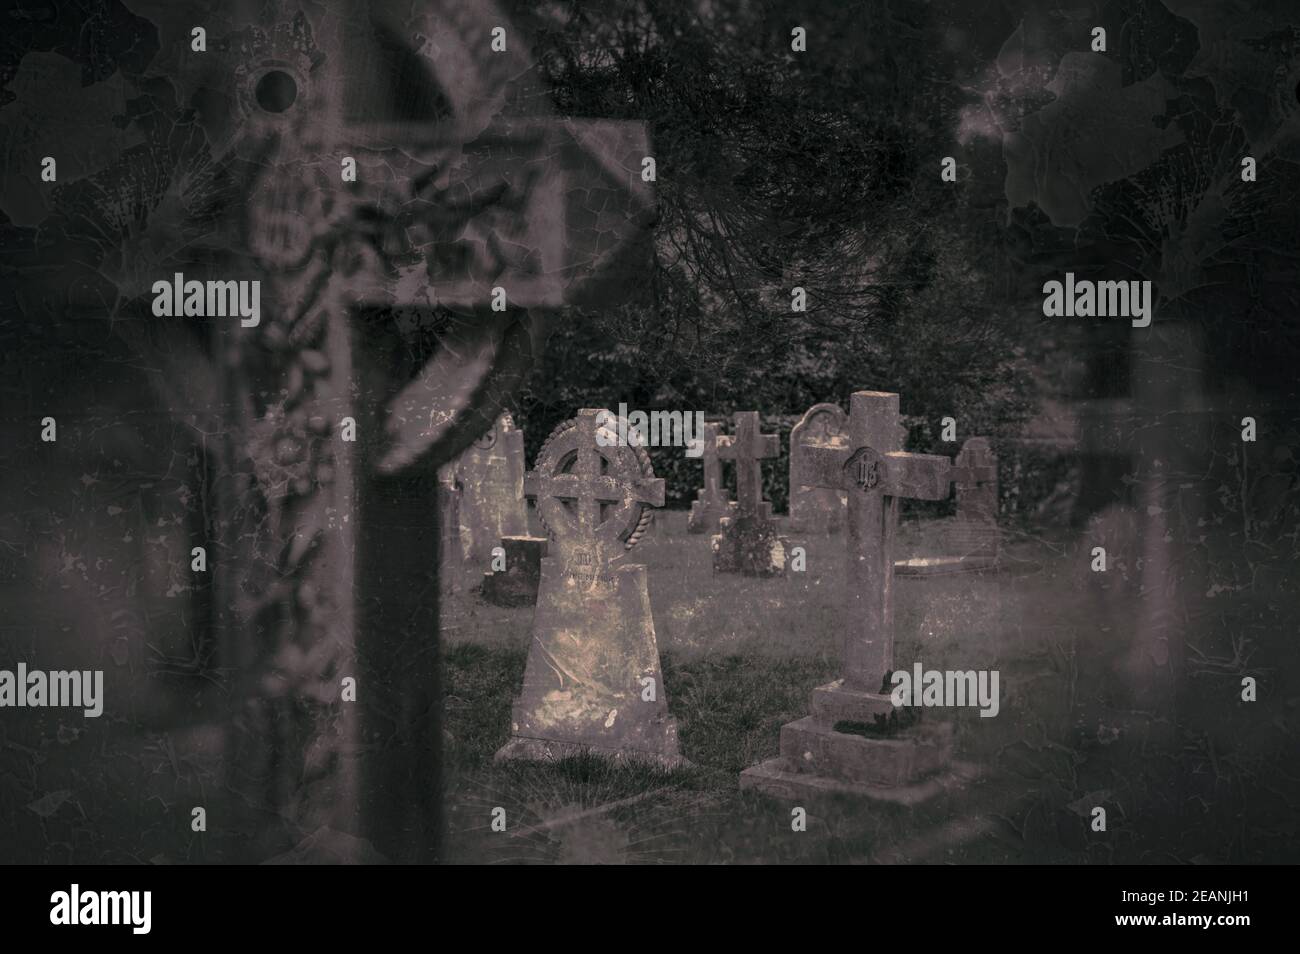 Spooky grunge effect image of graveyard with graves and gravestones. Stock Photo